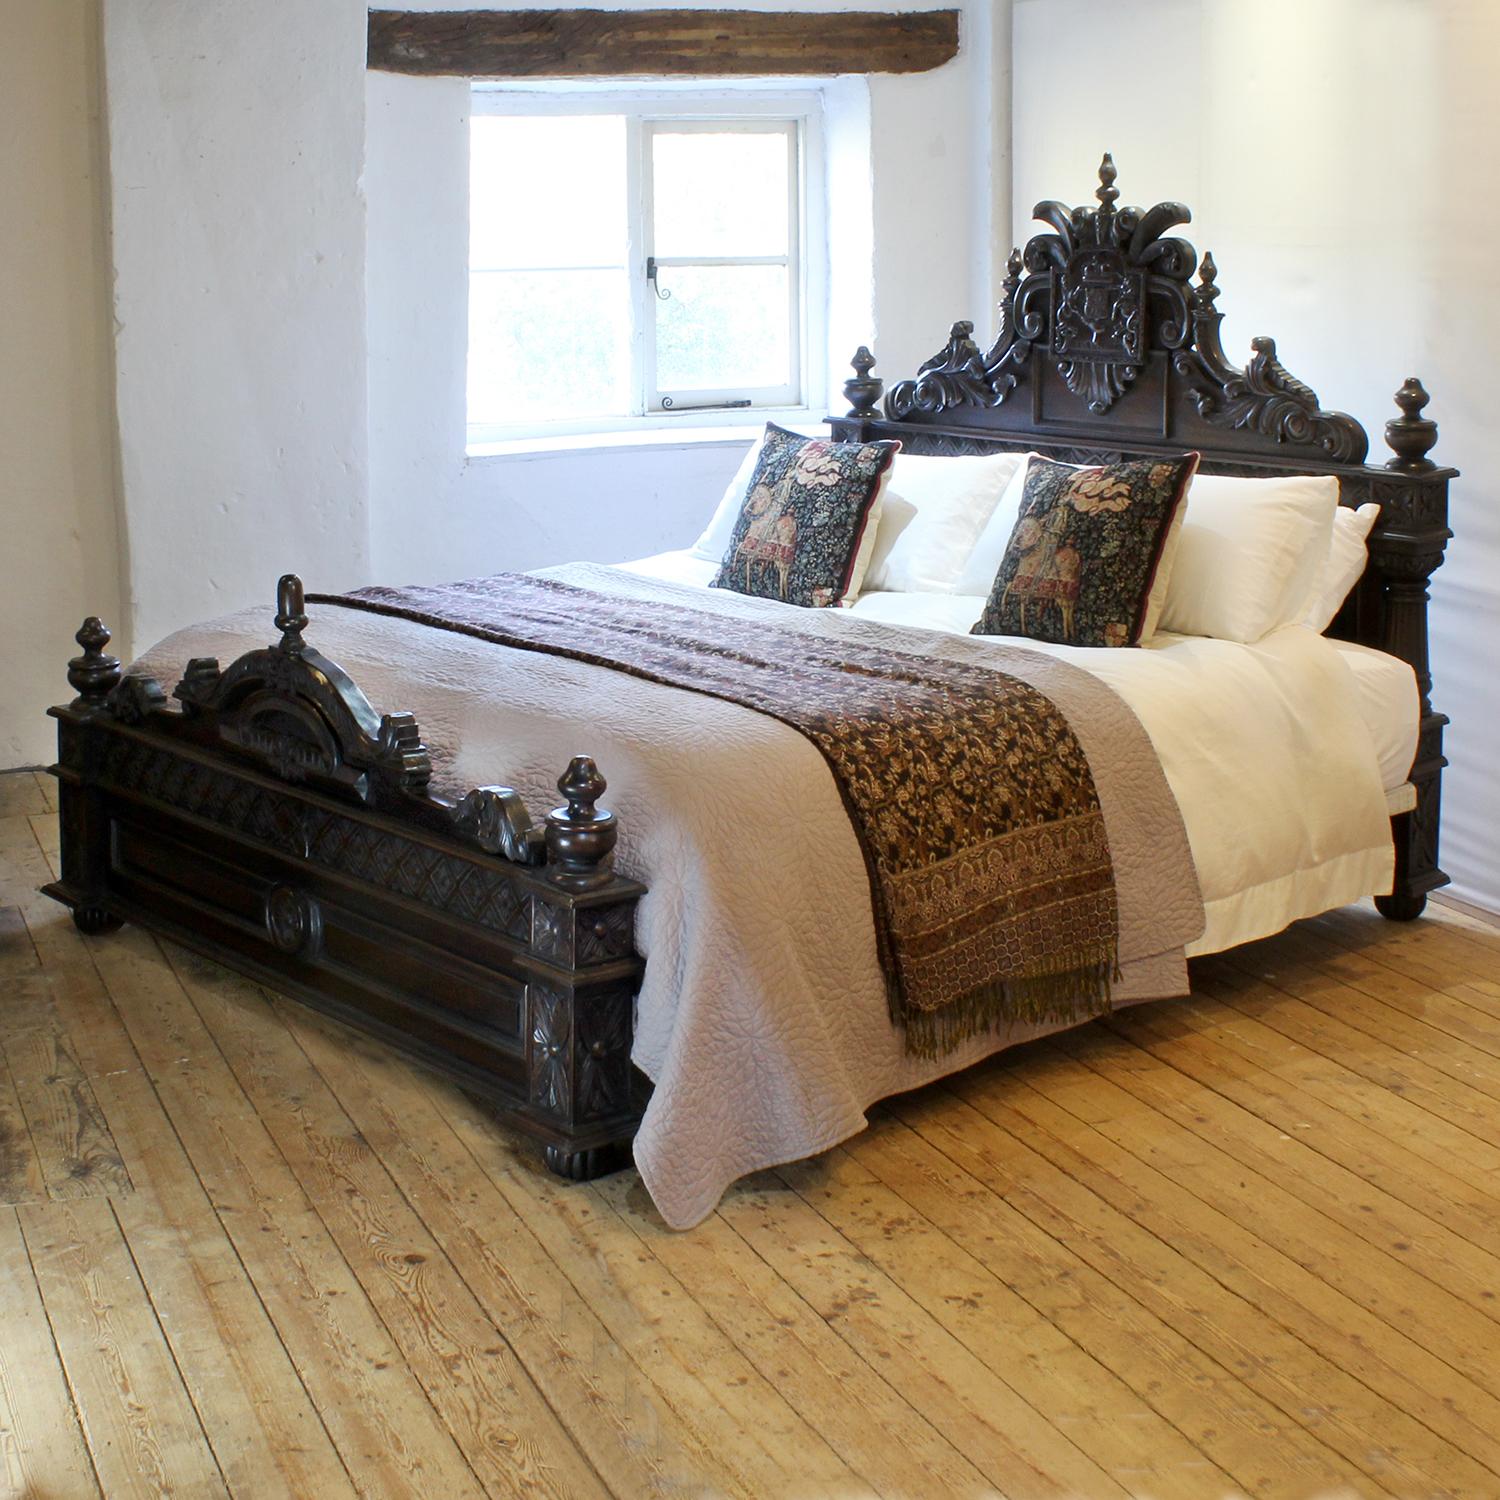 A fantastical carved vintage wooden bed in dark hardwood with a coat of arms carved in the centre of the head panel. 

This bed accepts a Californian King or UK Super King, 6ft wide (72 in), base and mattress set.

The price includes a firm bed base